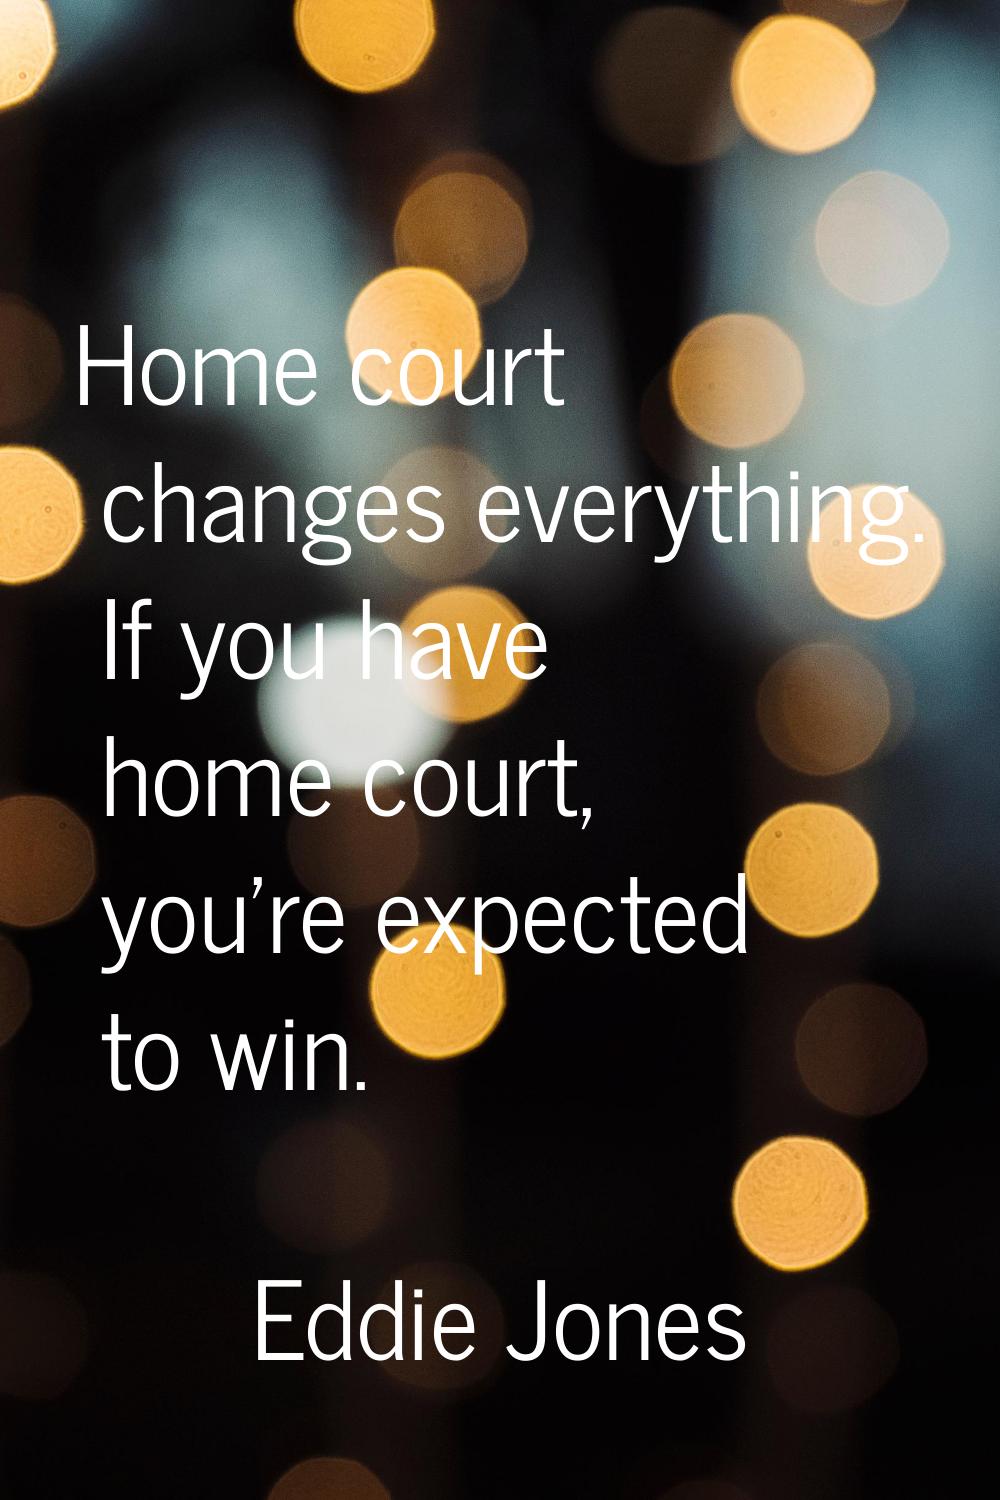 Home court changes everything. If you have home court, you're expected to win.